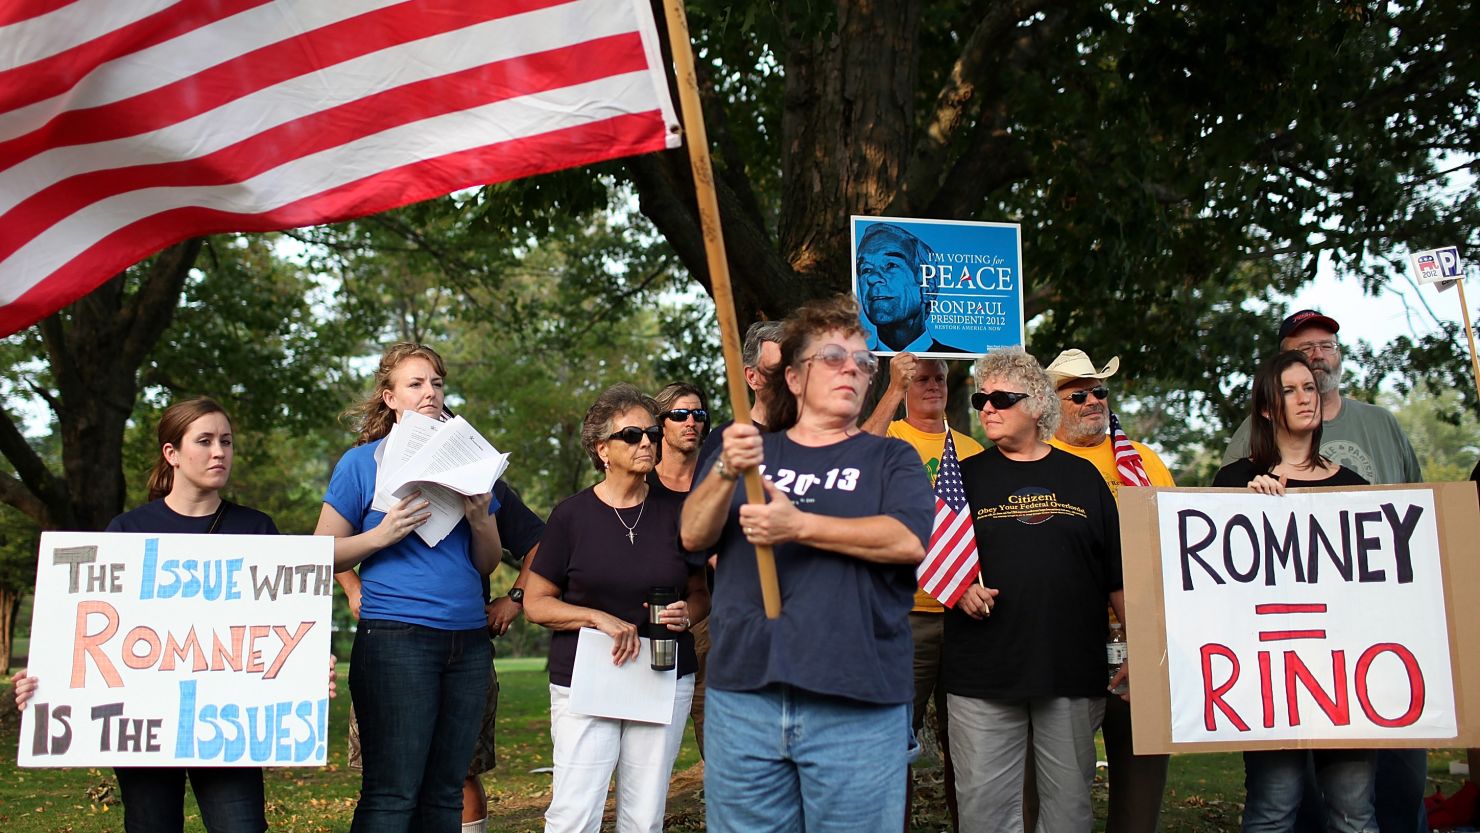 Members of the New Hampshire Tea Party protest against  Mitt Romney before a rally on September 4, 2011.